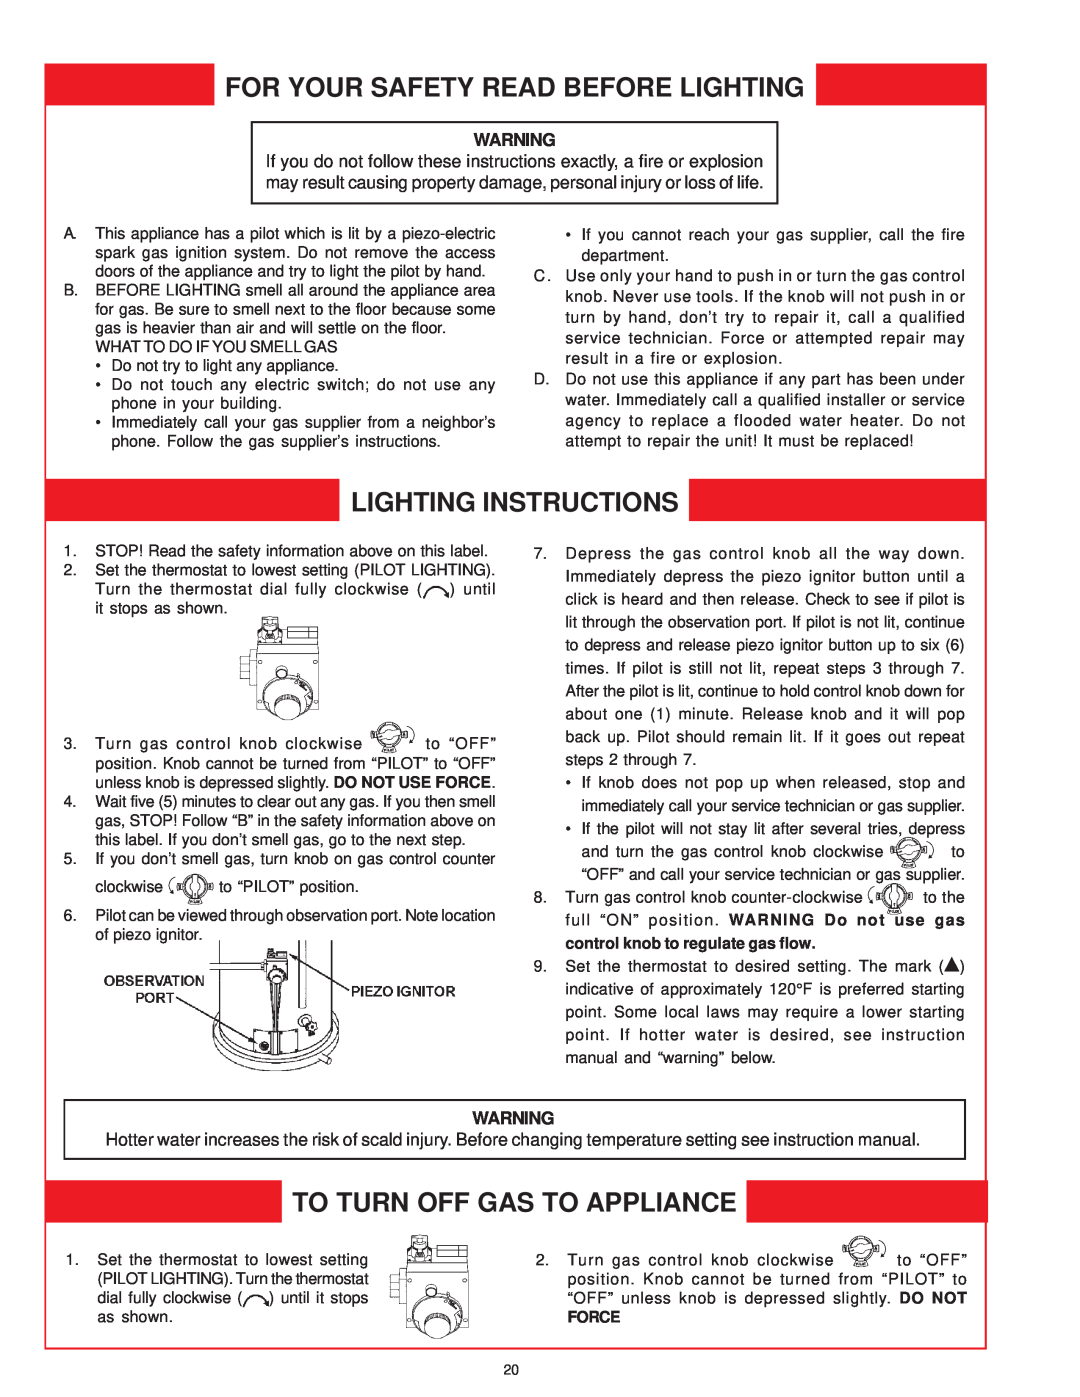 A.O. Smith GDVH, XDVS For Your Safety Read Before Lighting, Lighting Instructions, To Turn Off Gas To Appliance, Force 